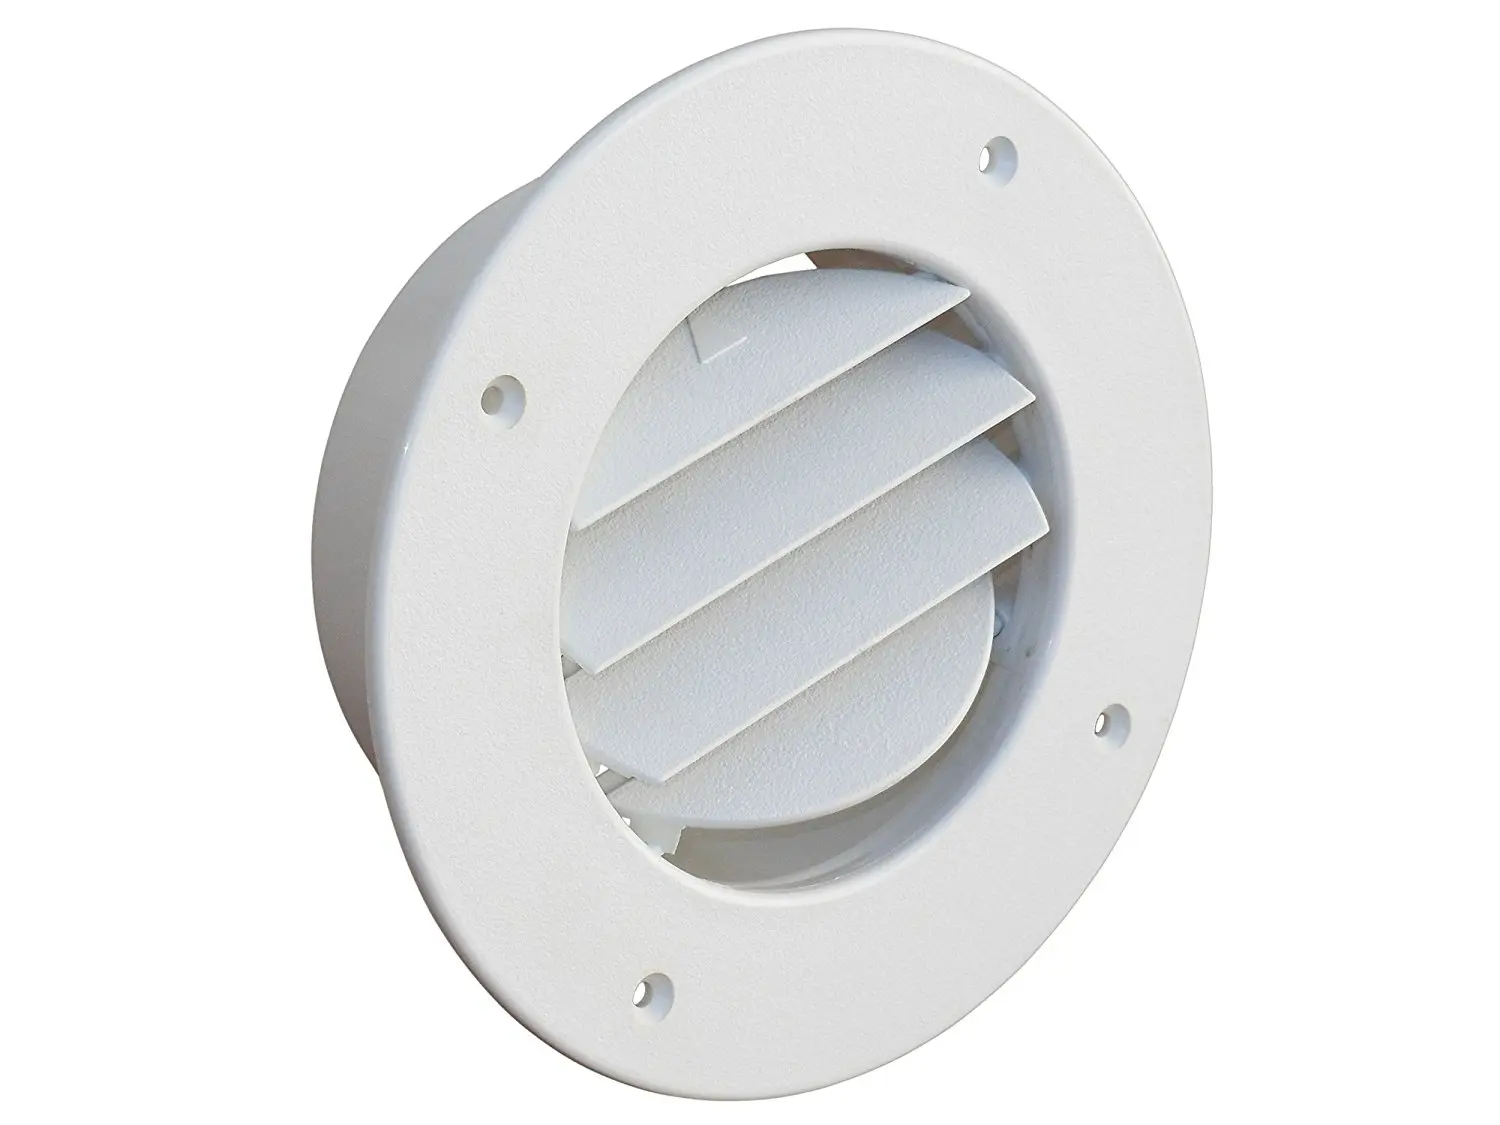 Cheap Marine Louvered Vents, find Marine Louvered Vents deals on line